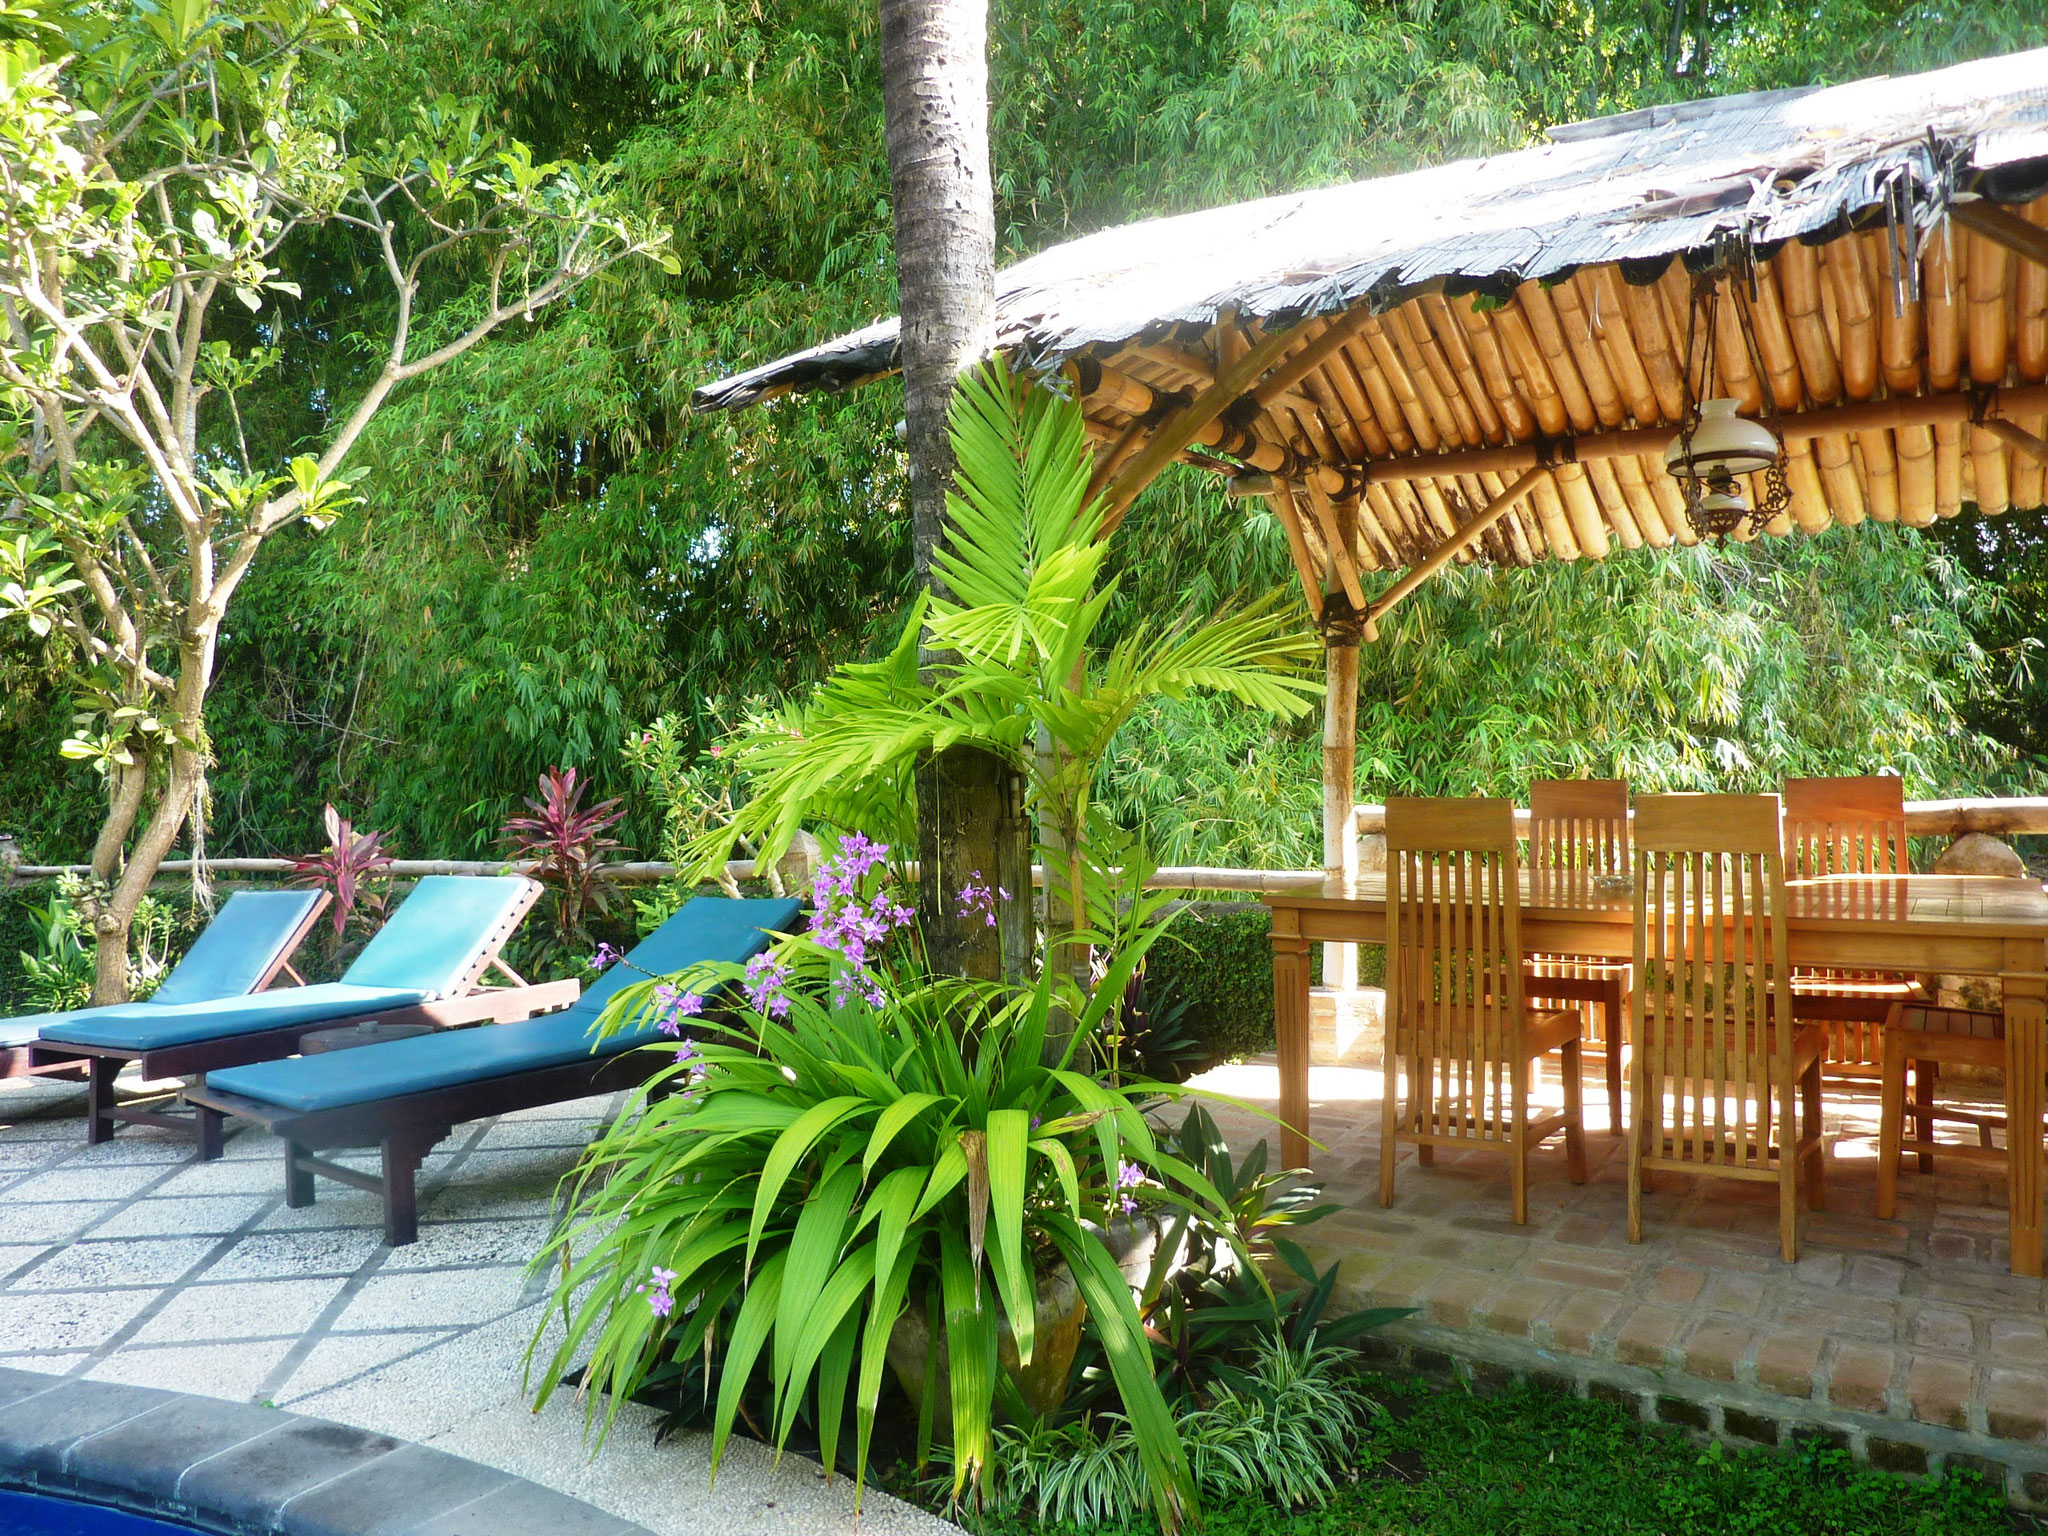 Deck chairs and the bamboo hut